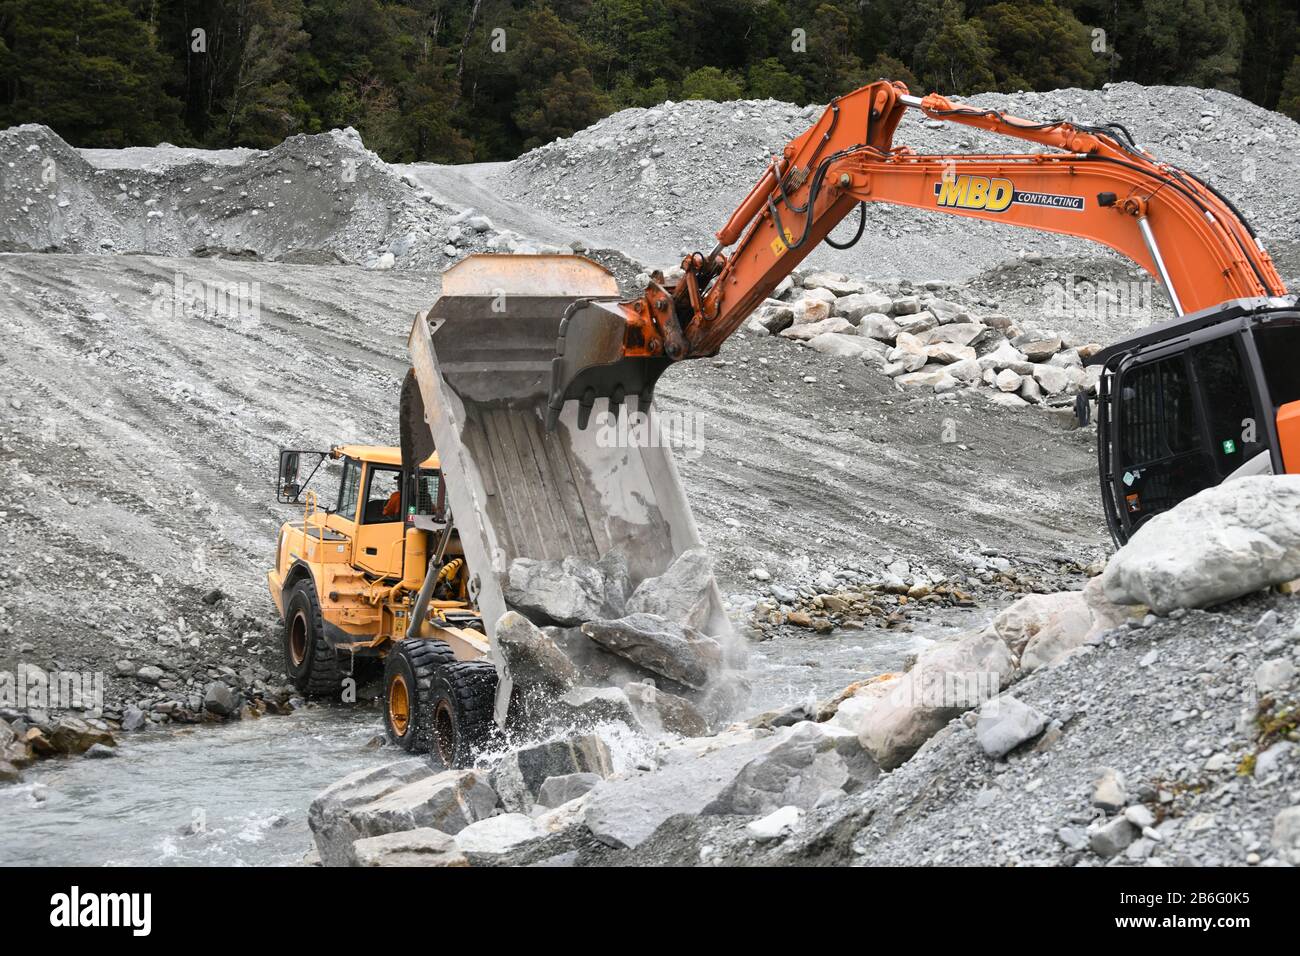 OTIRA, NEW ZEALAND, SEPTEMBER 19, 2019: A tip truck dumps a load of rock to create flood water control on a West Coast river just above a railway brid Stock Photo